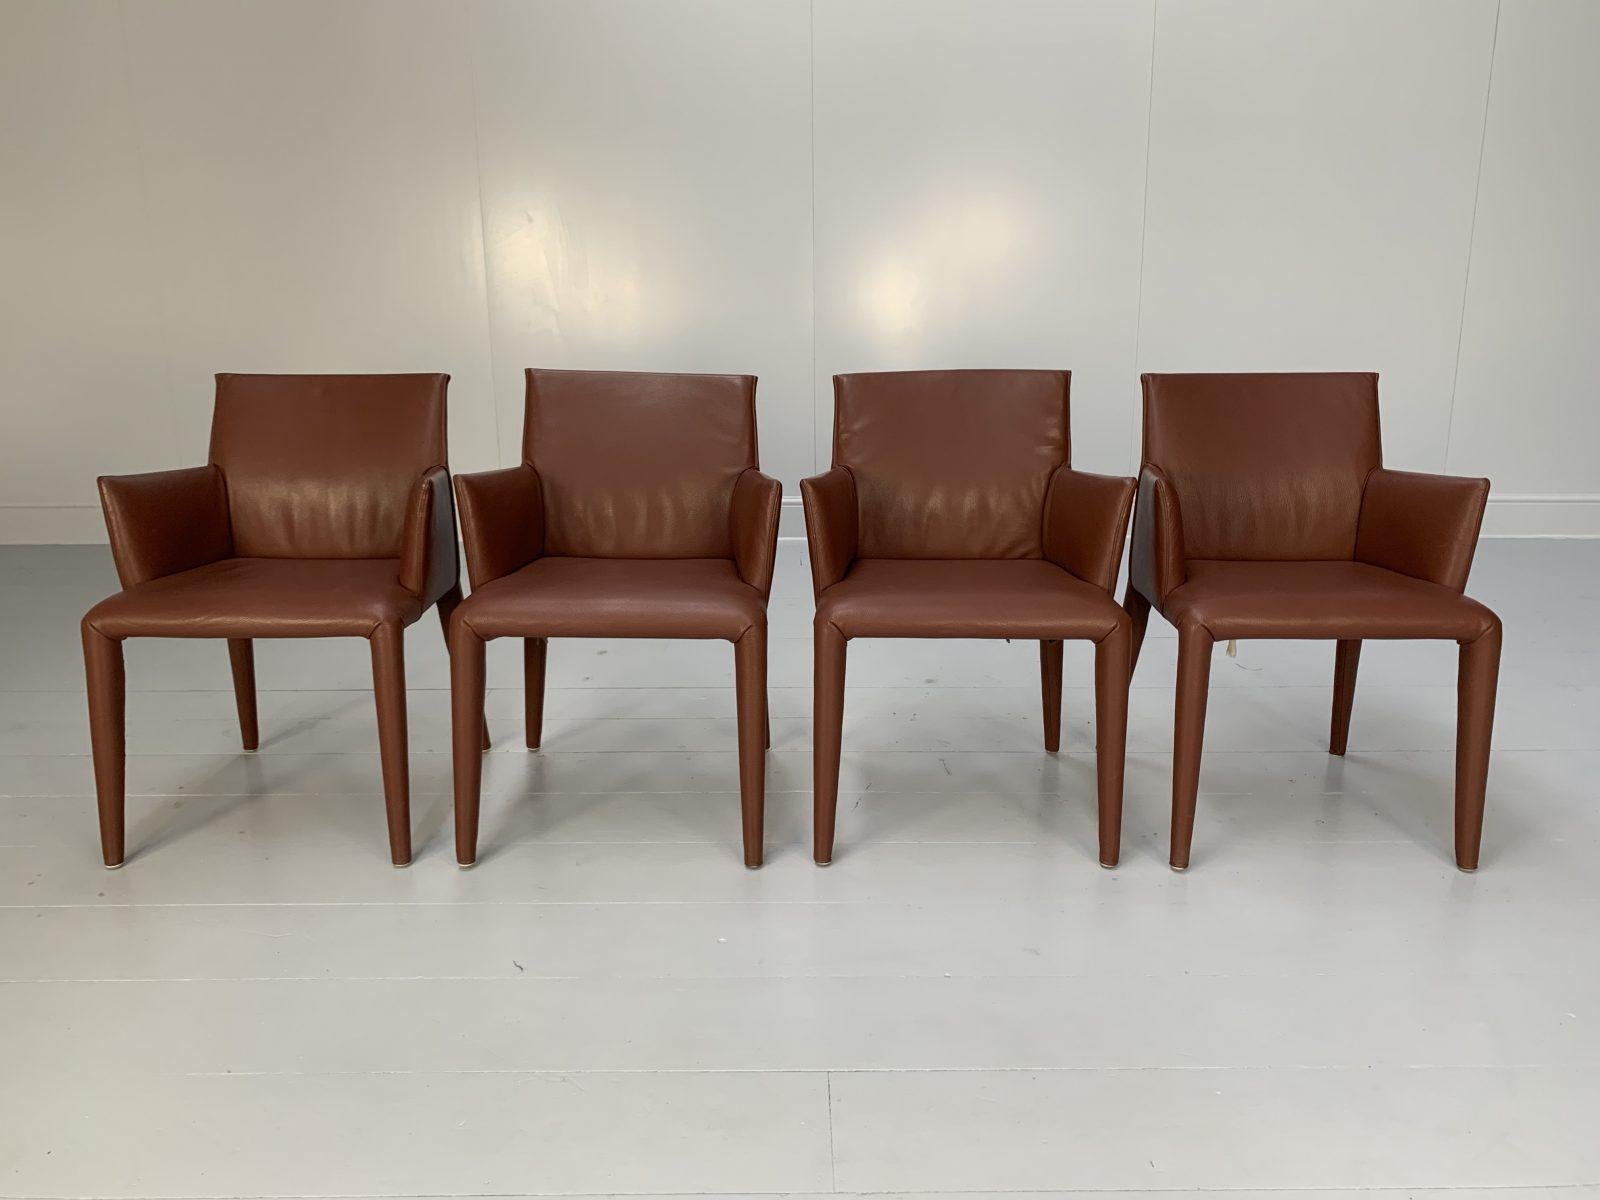 Contemporary Suite of 4 B&B Italia “Vol Au Vent” Dining Armchairs in “Gamma” Leather